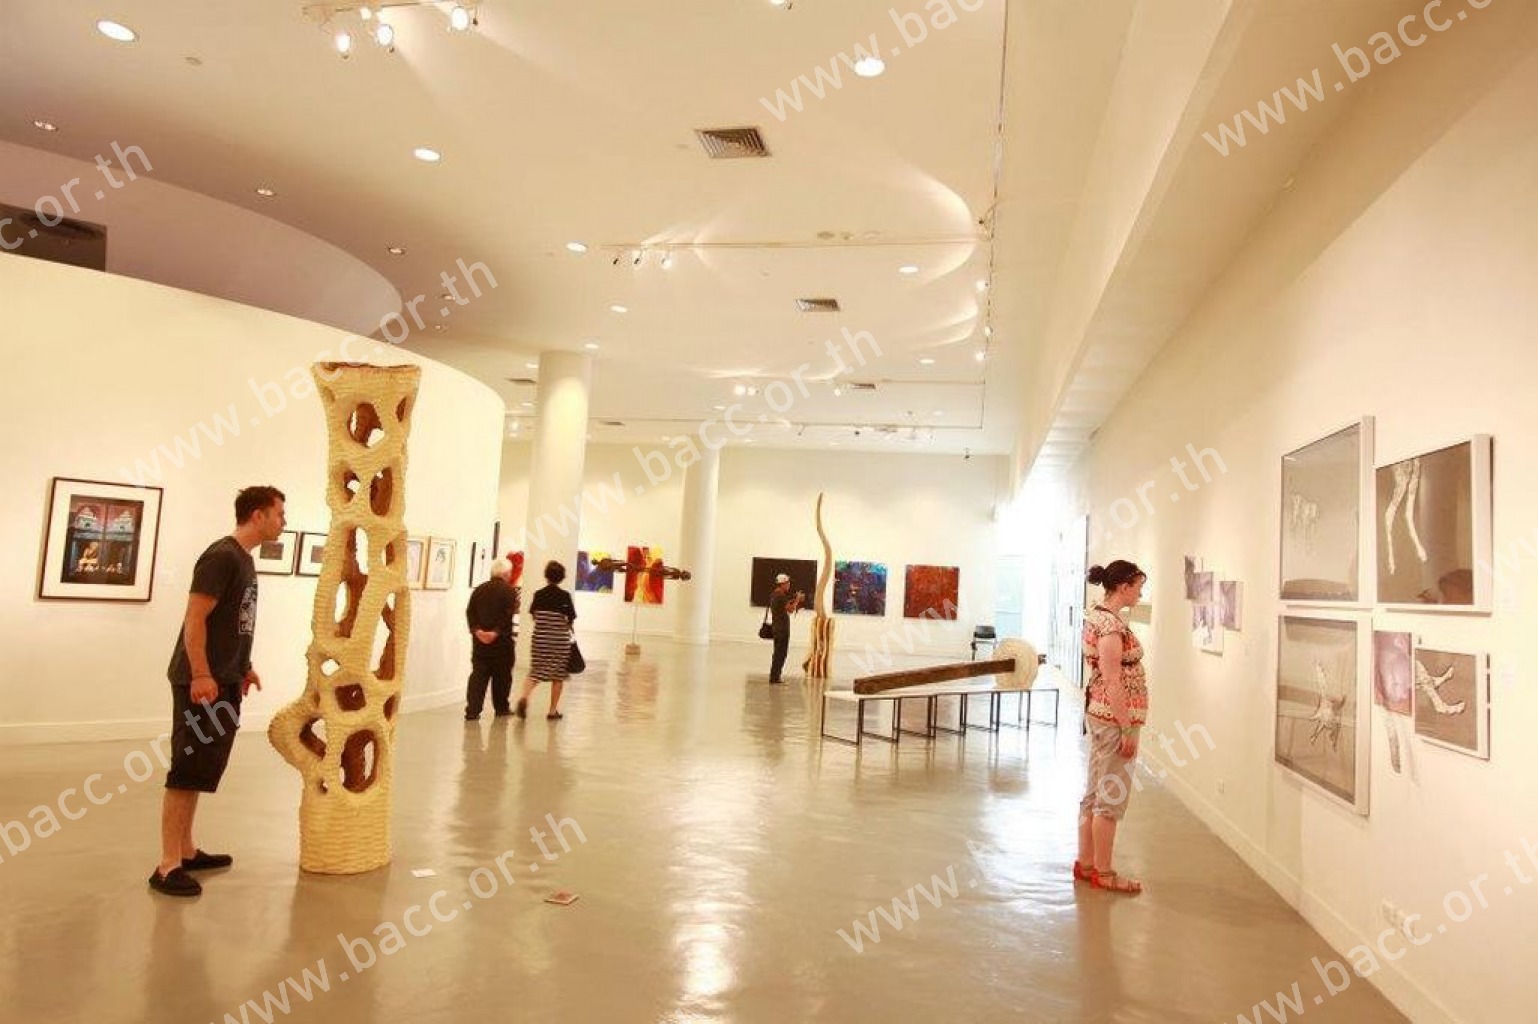 The Faculty of Fine Arts, Chiang Mai University has the Arts Academic Exhibition on occasion of 30th anniversary of The Faculty of Fine Arts